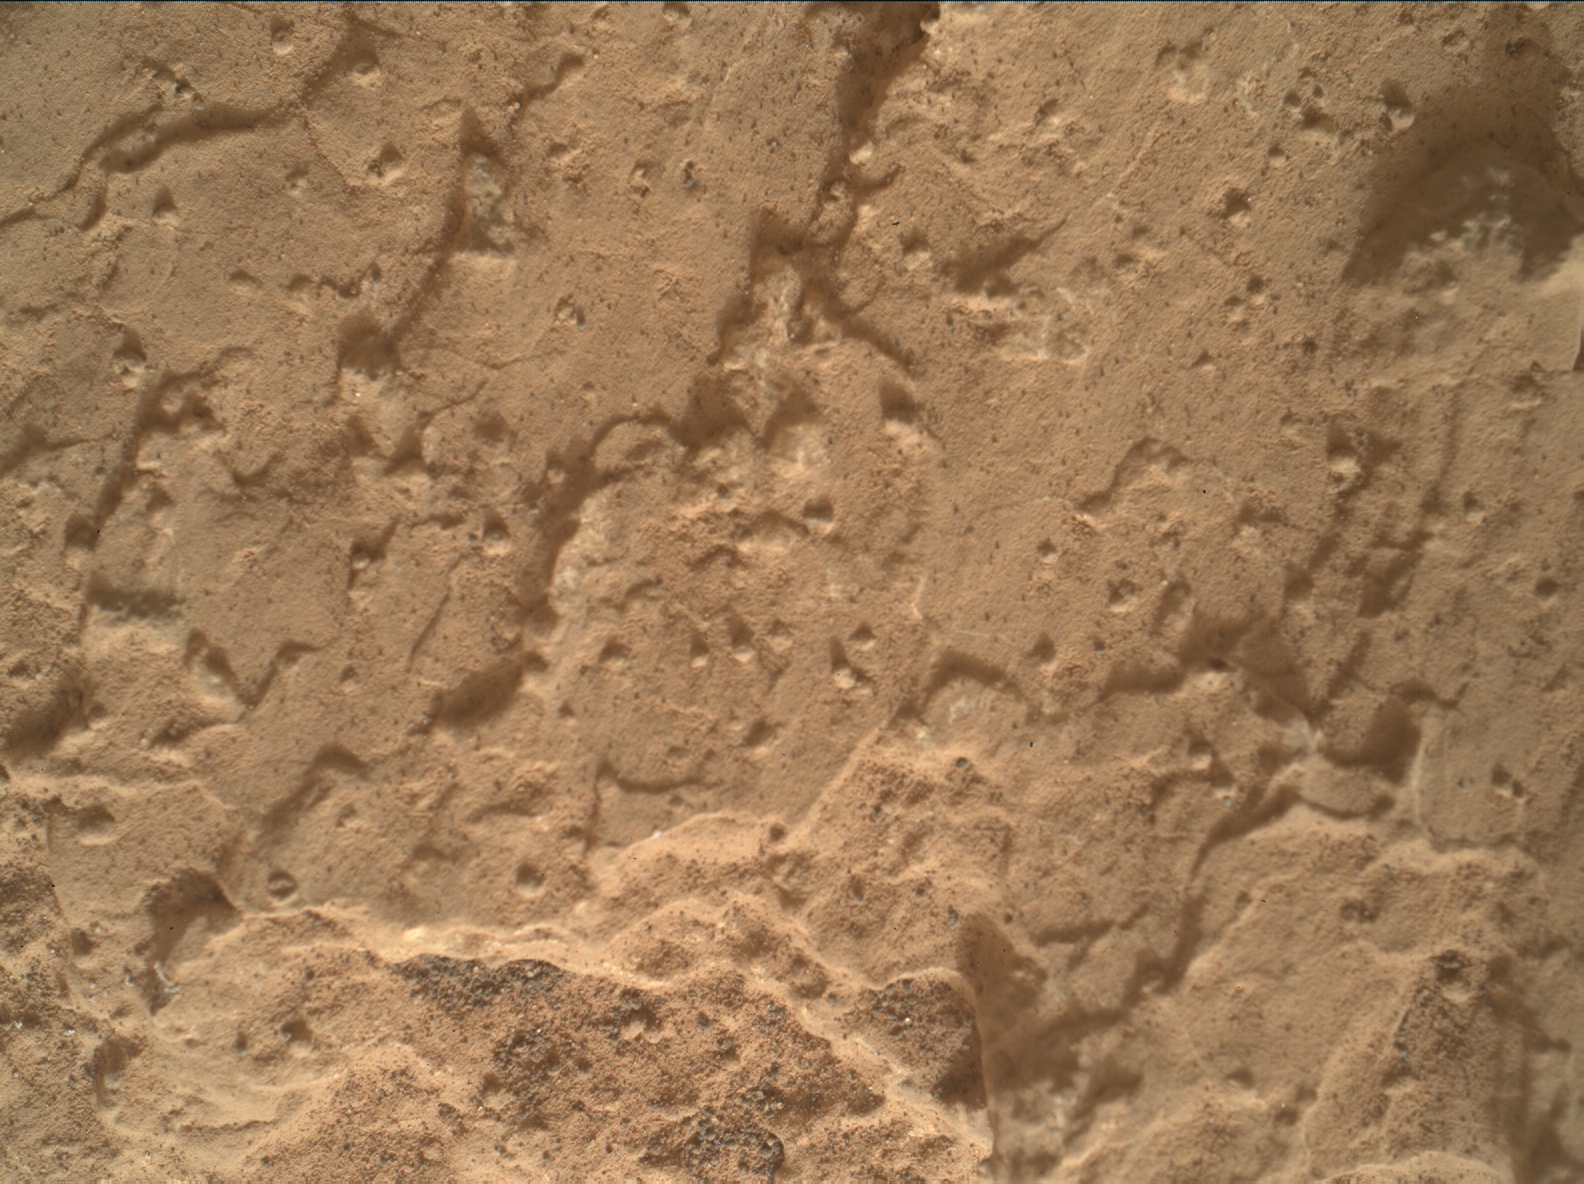 Nasa's Mars rover Curiosity acquired this image using its Mars Hand Lens Imager (MAHLI) on Sol 2803